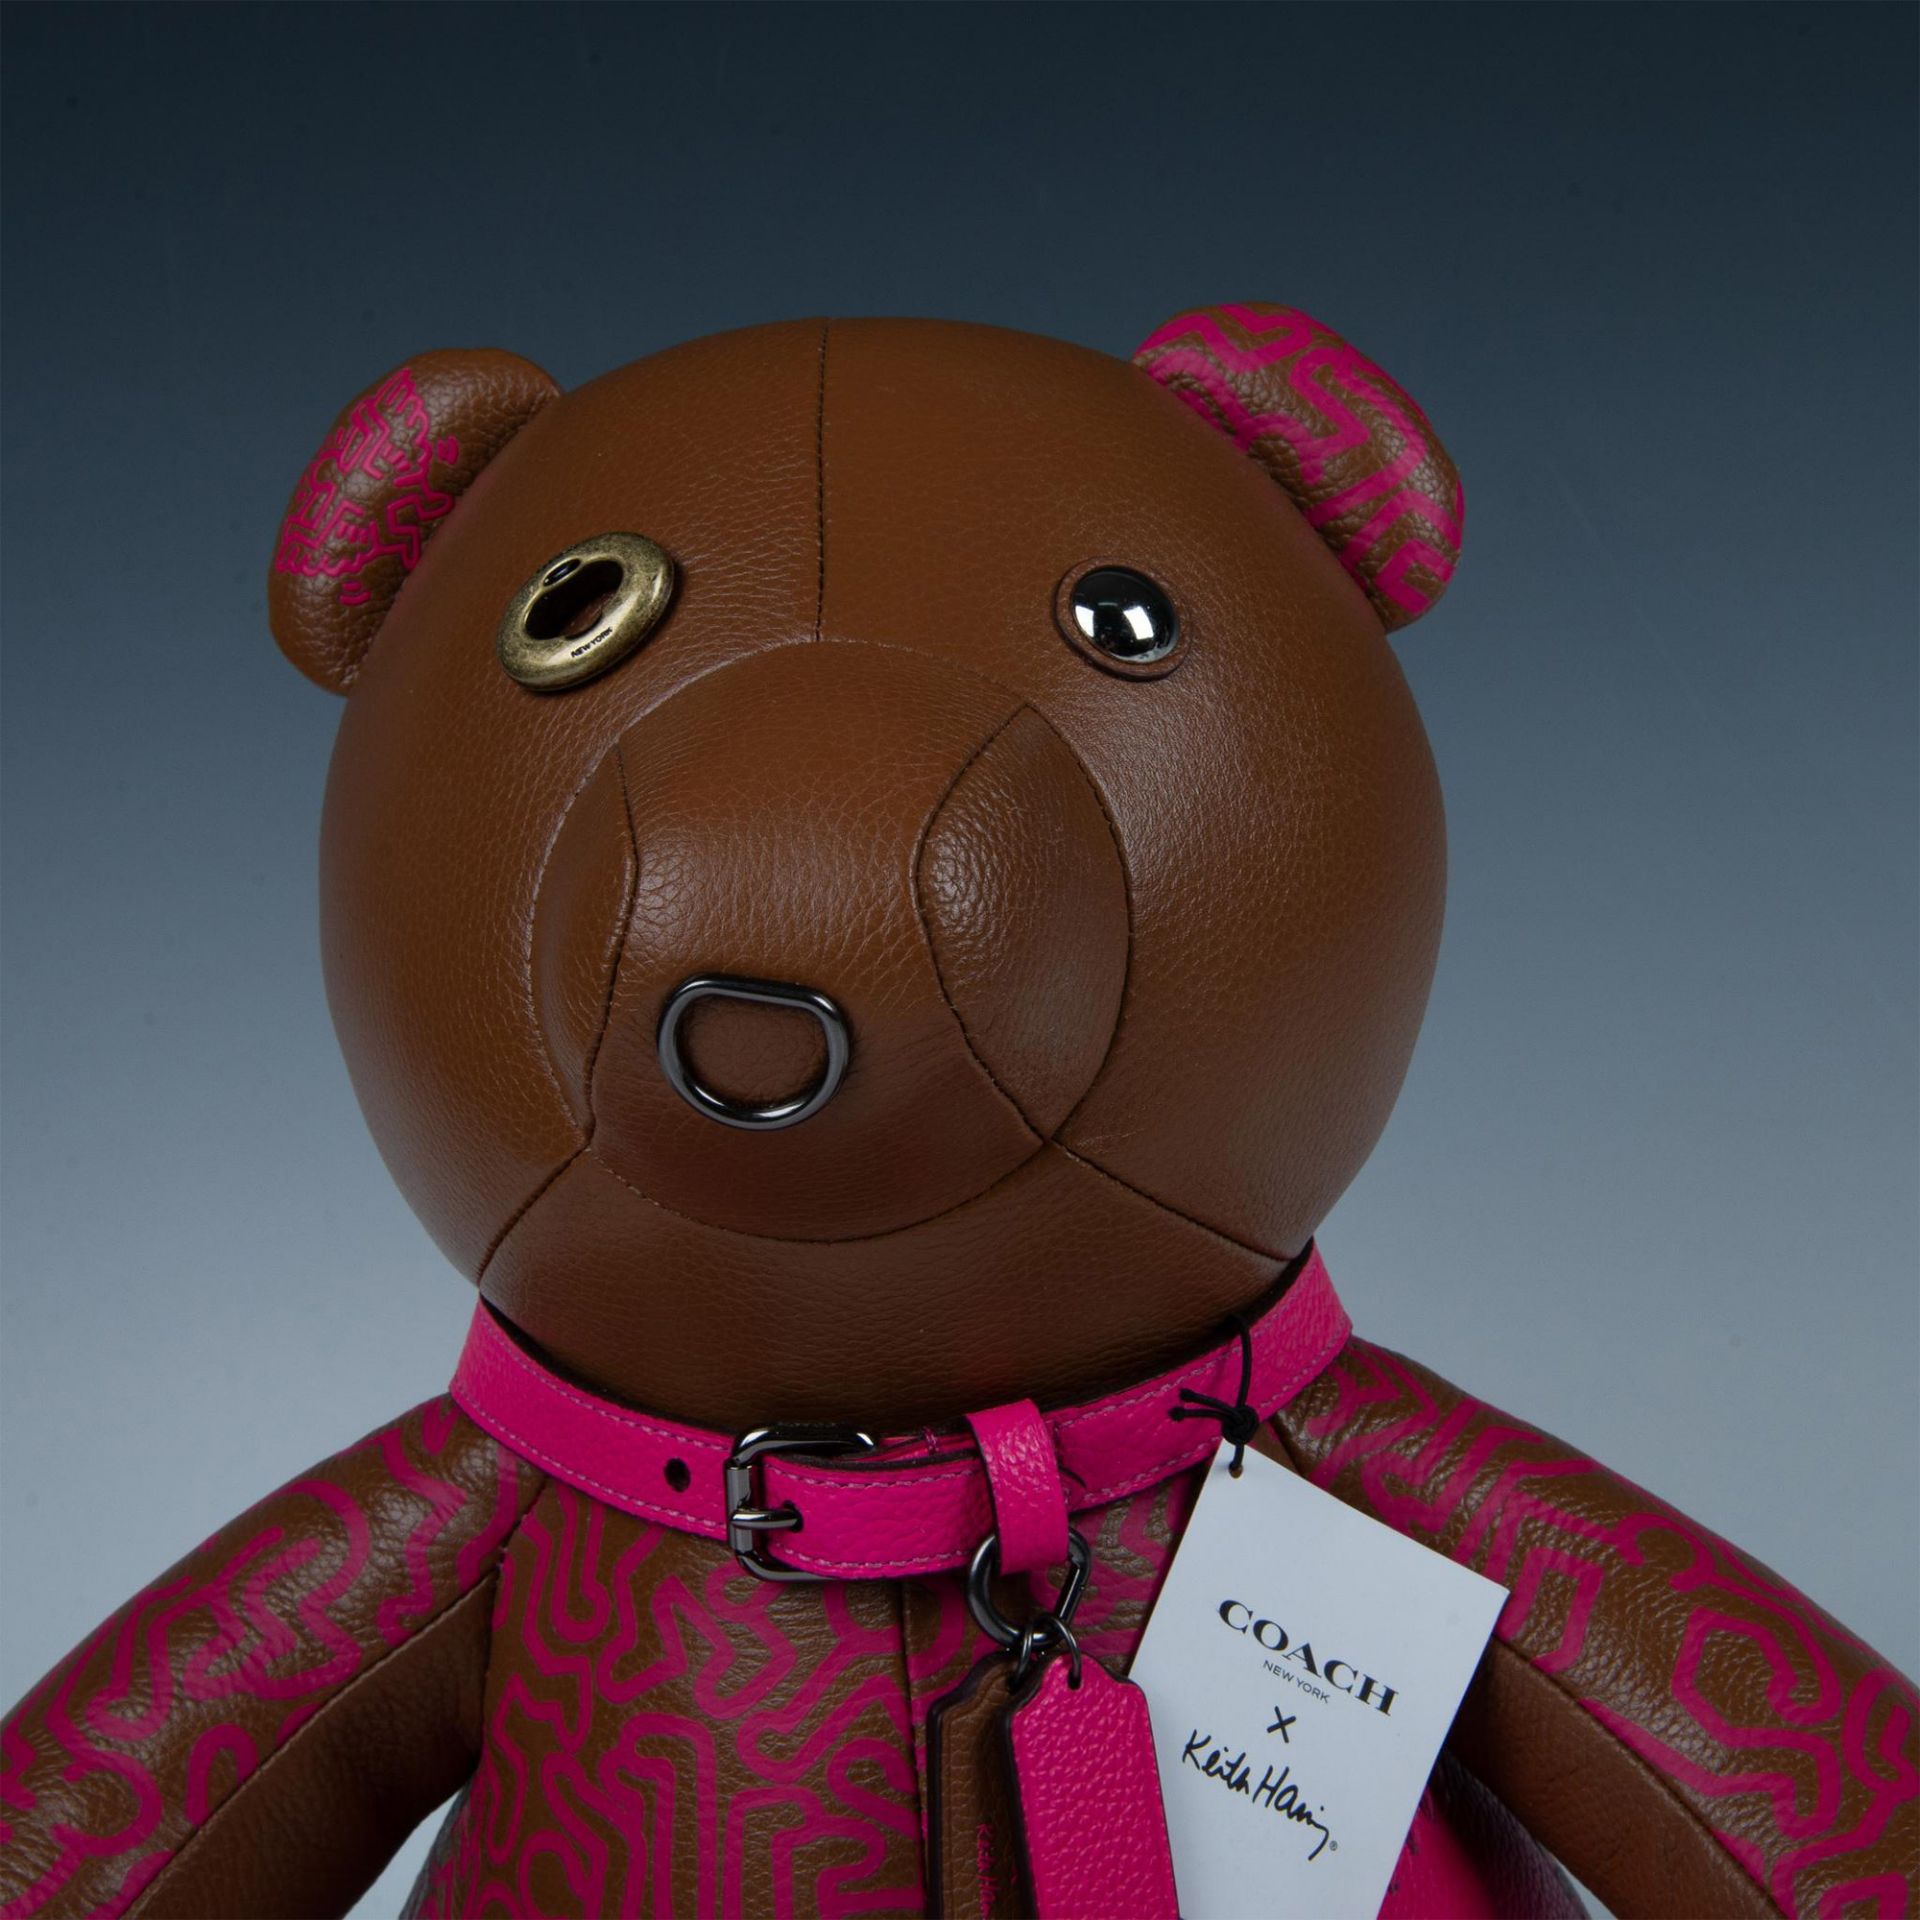 Coach Keith Haring Collaboration Plush Leather Teddy Bear - Image 2 of 7